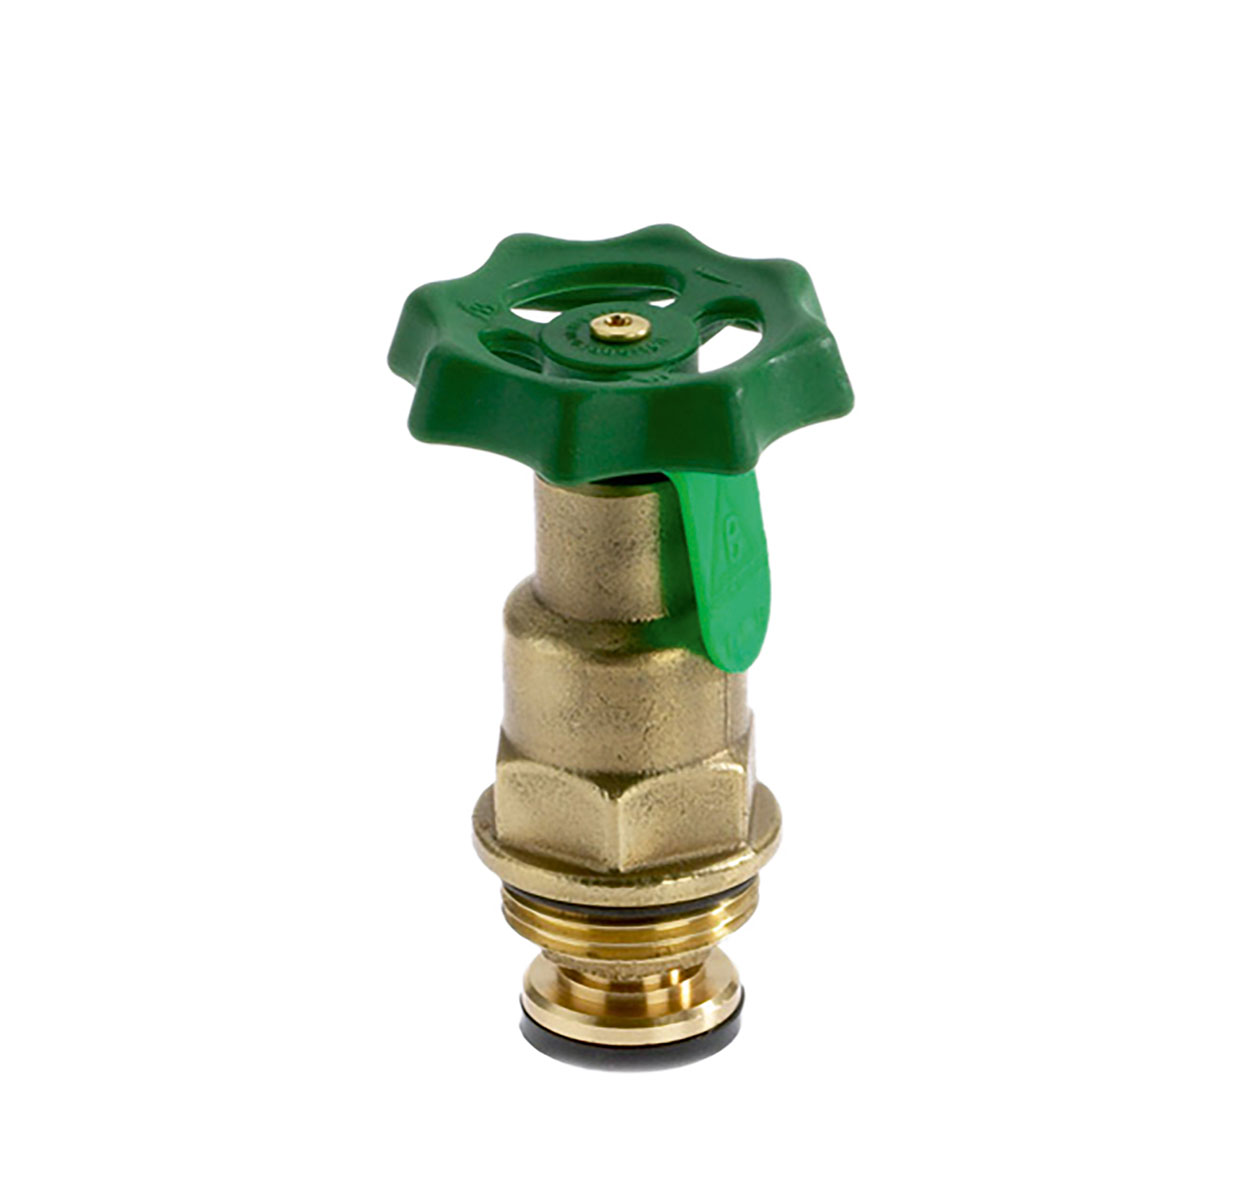 1215400 - Brass Upper-part with grease chamber for Combined Free-flow and Backflow-preventer valves, not-rising spindle